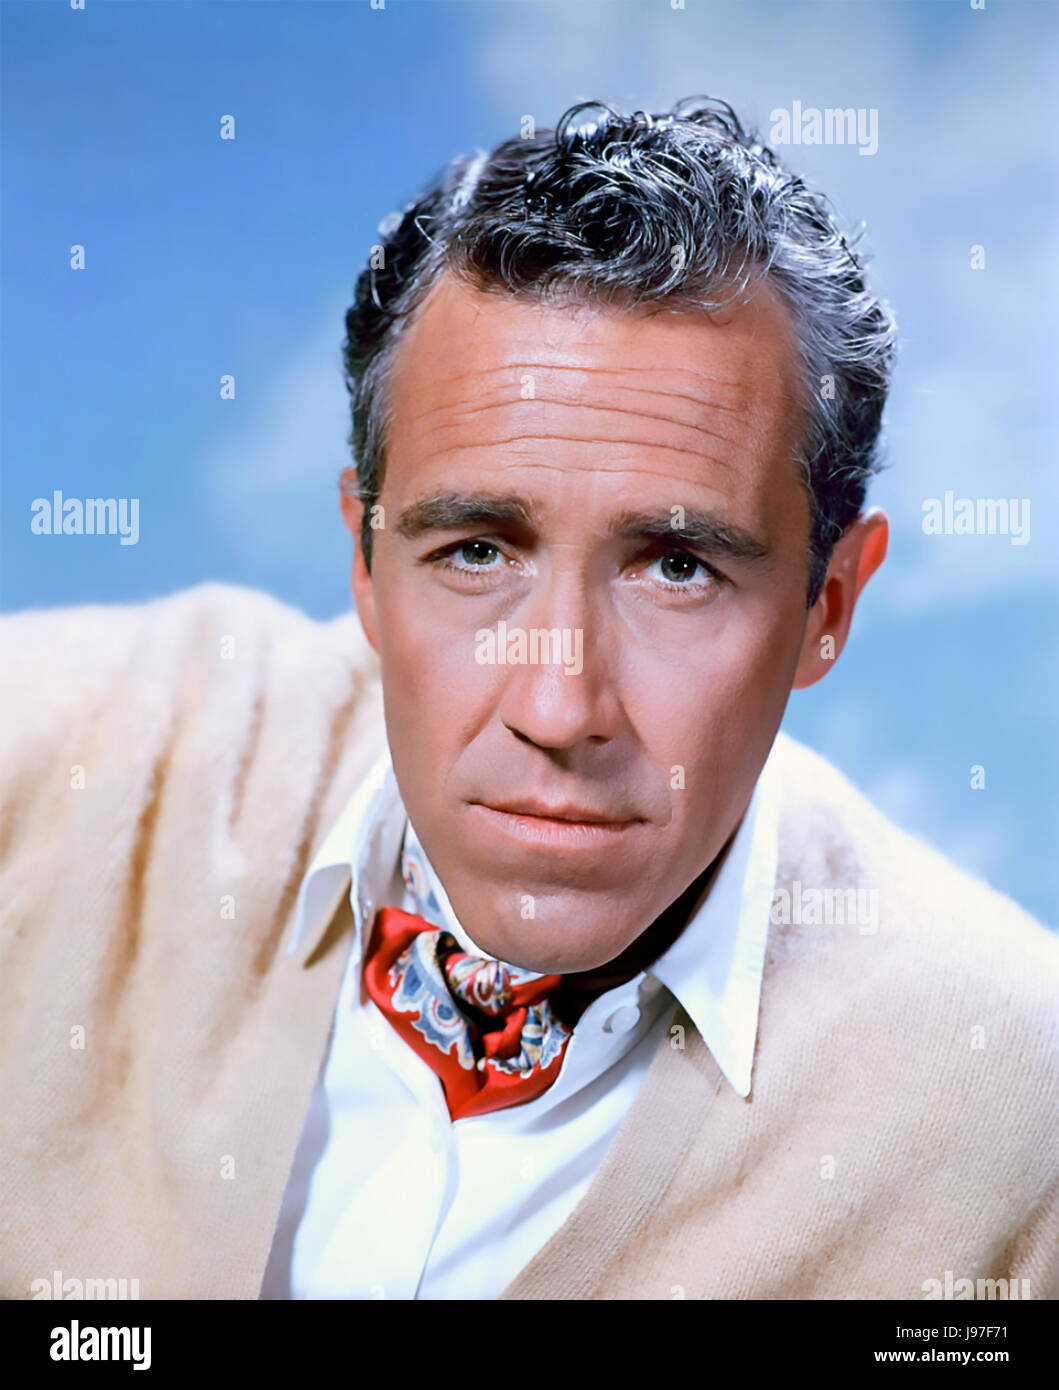 jason-robards-1922-2000-us-film-actor-about-1970-J97F71.jpg